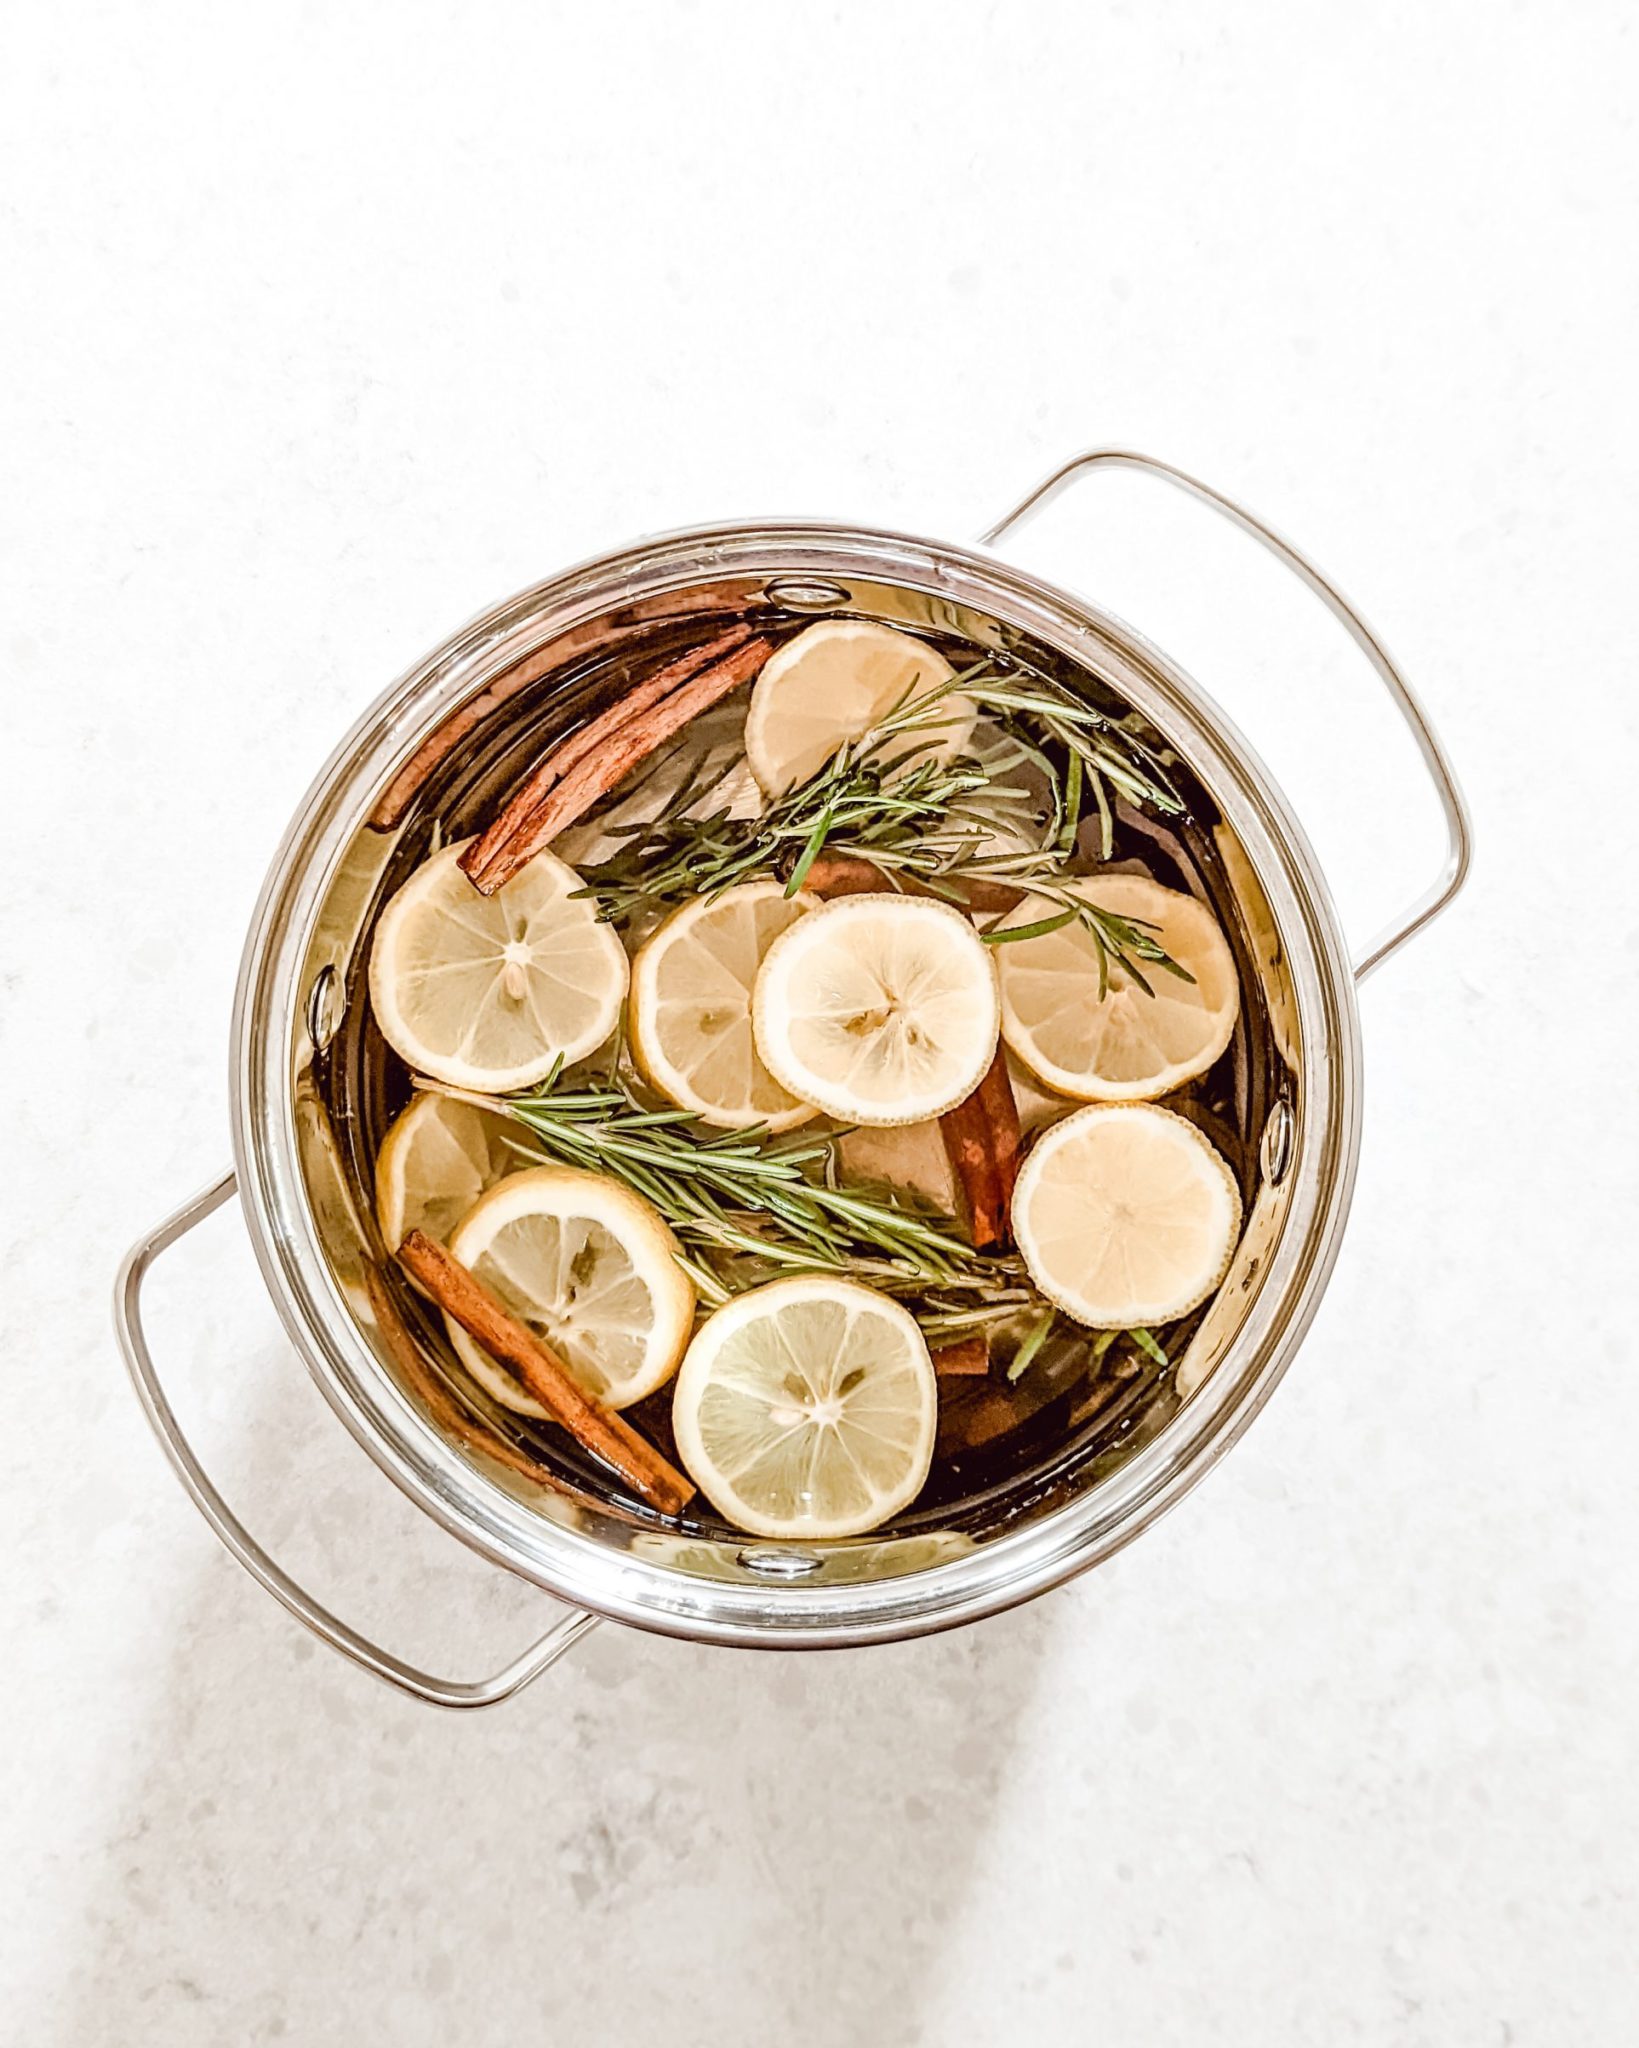 The Best Smelling Spring Simmer Pot Recipes to Freshen Up Your